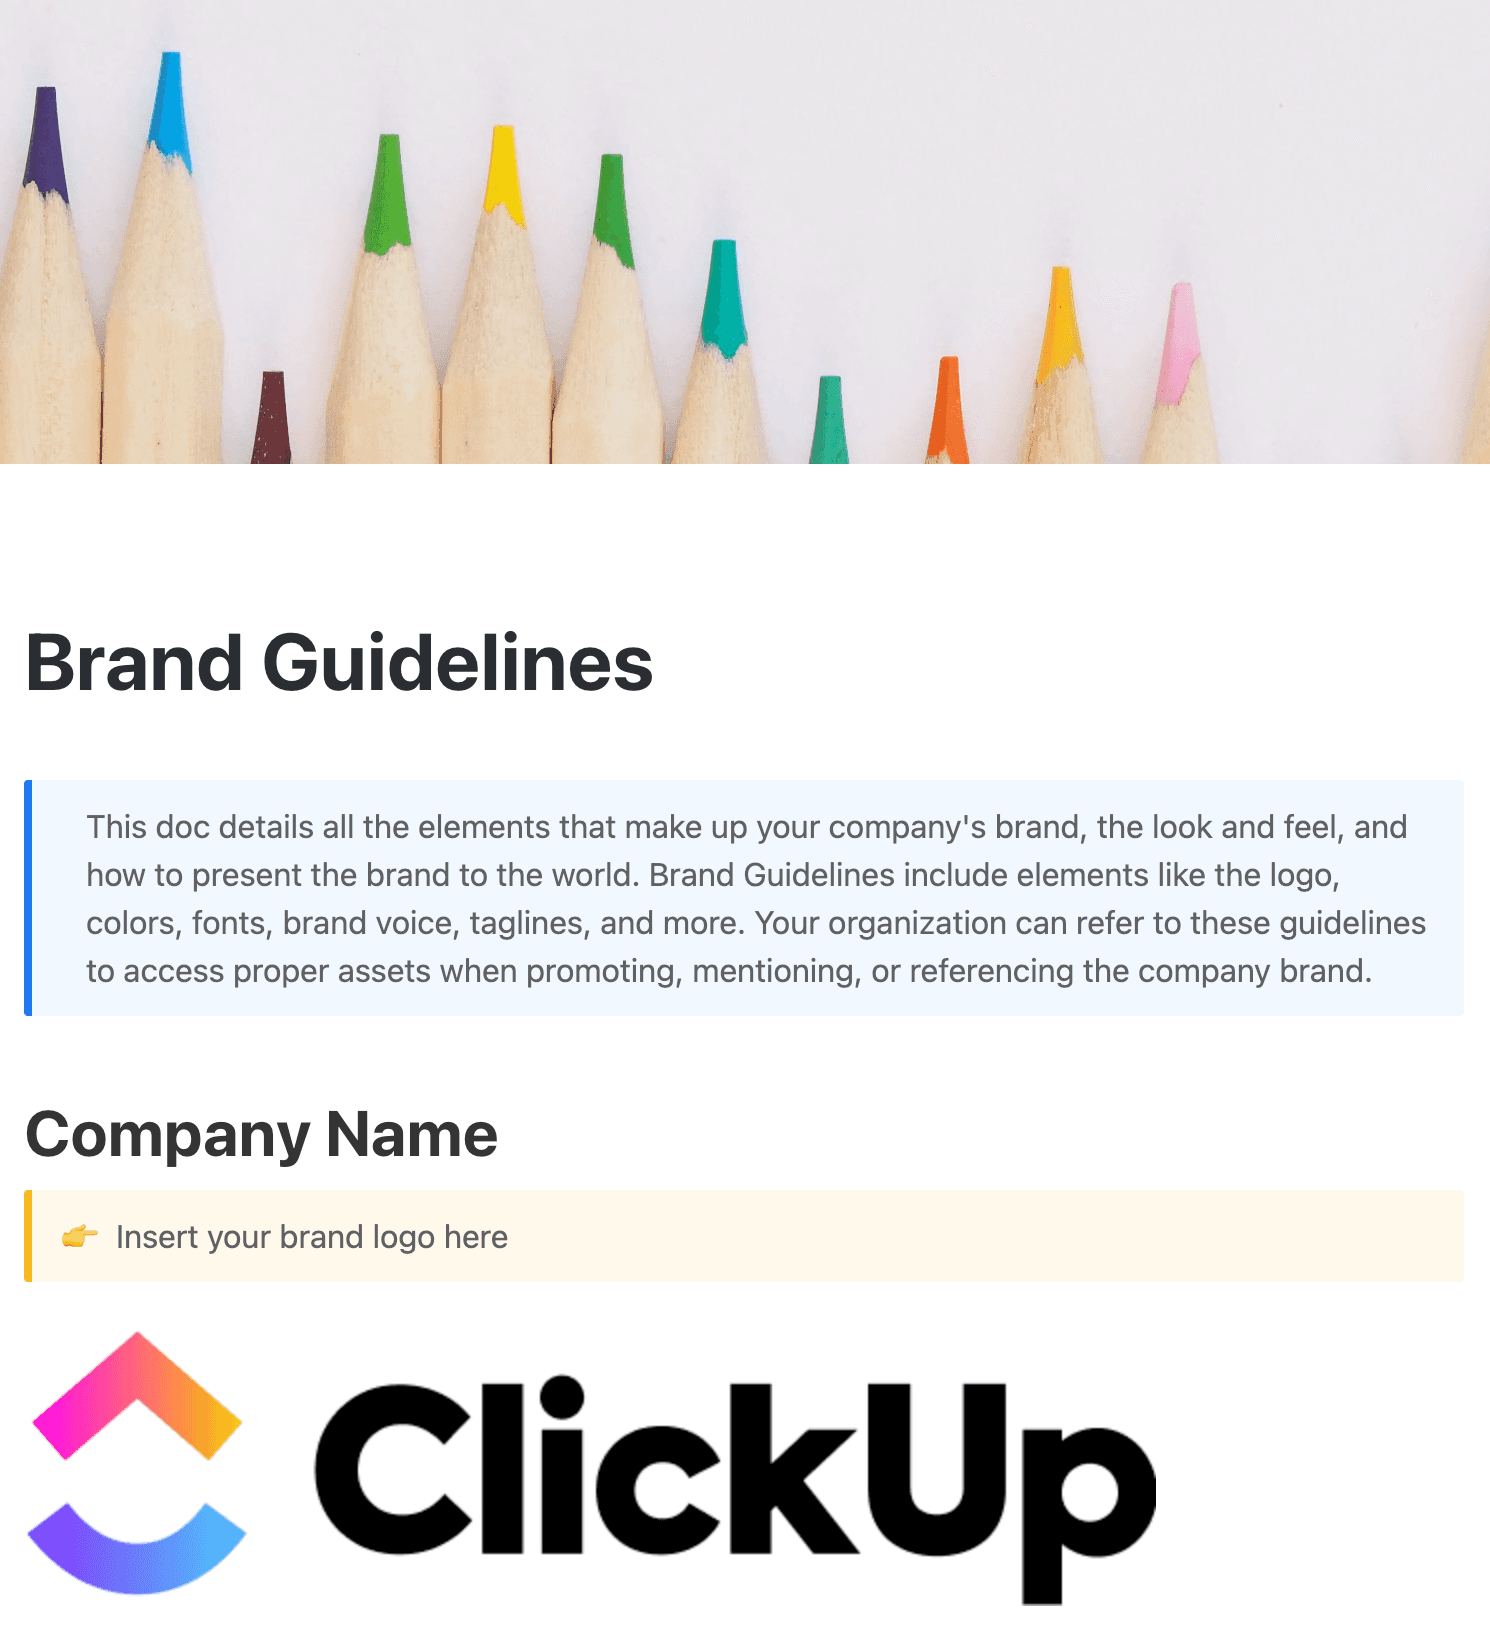 This brand guidelines doc details all the elements that make up your company's brand, the look and feel, and how to present the brand to the world. Brand Guidelines include elements like the logo, colors, fonts, brand voice, taglines, and more.